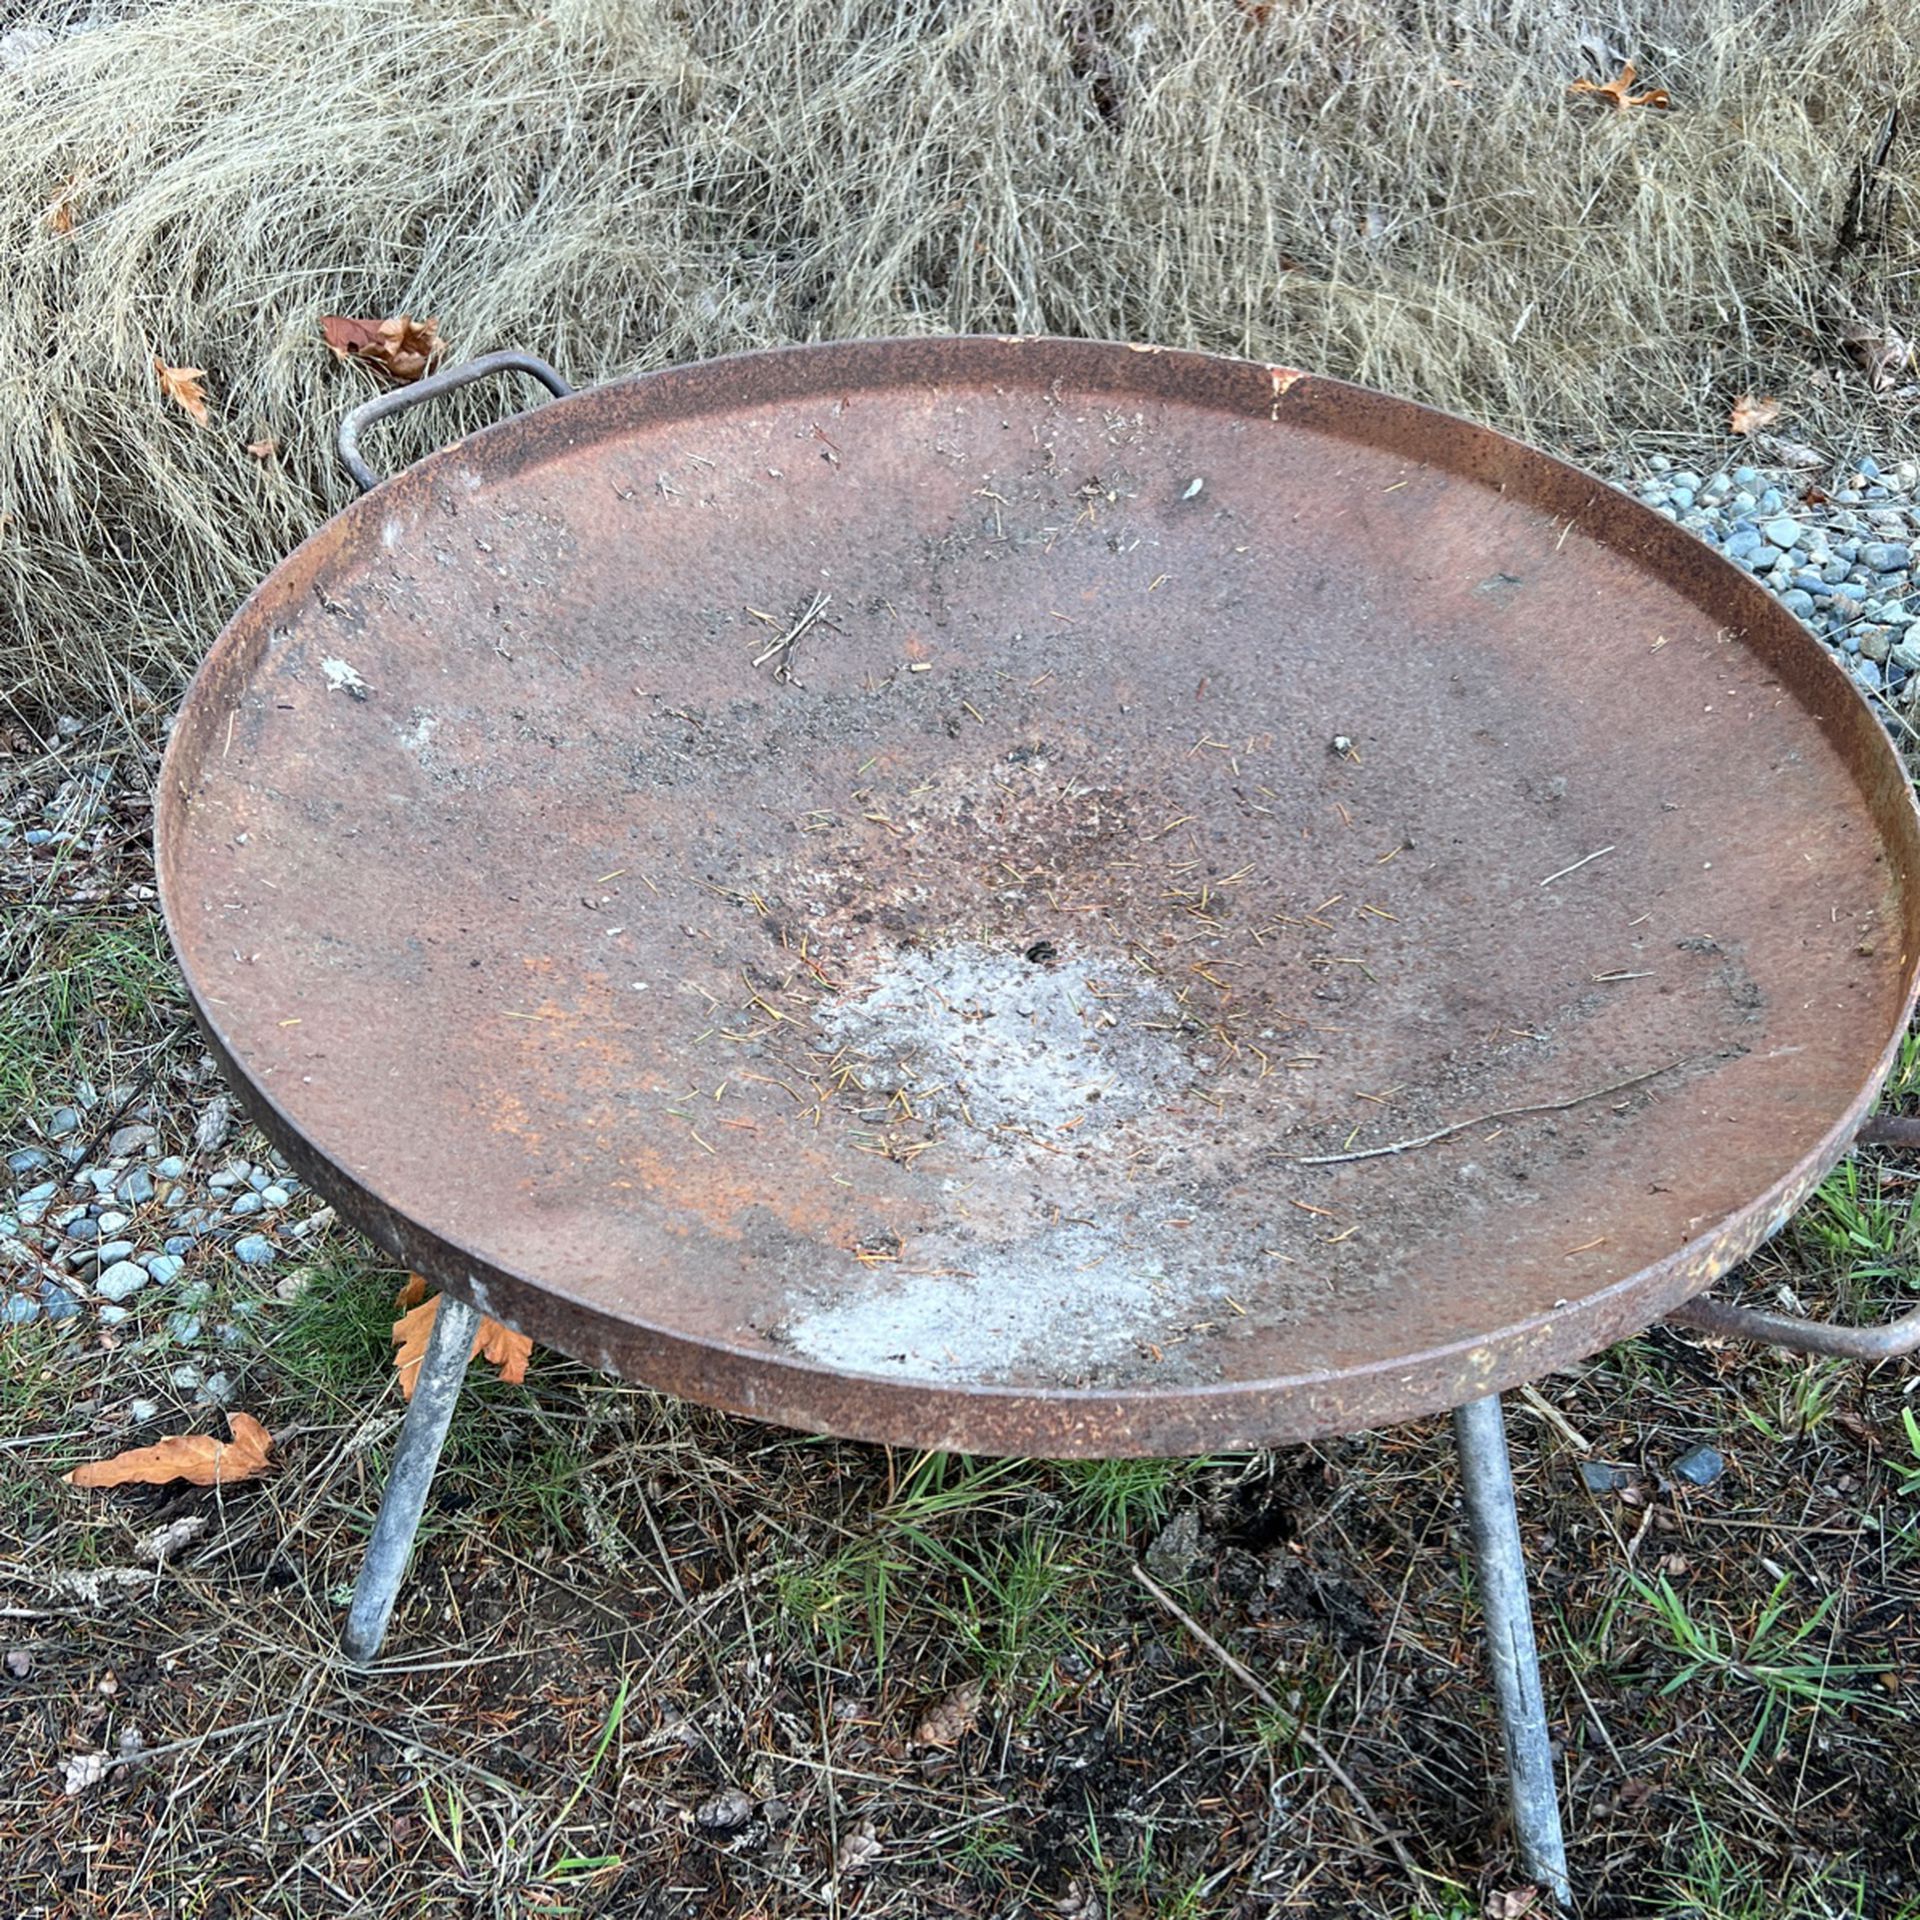 BBQ Saucer Or Fire Pit